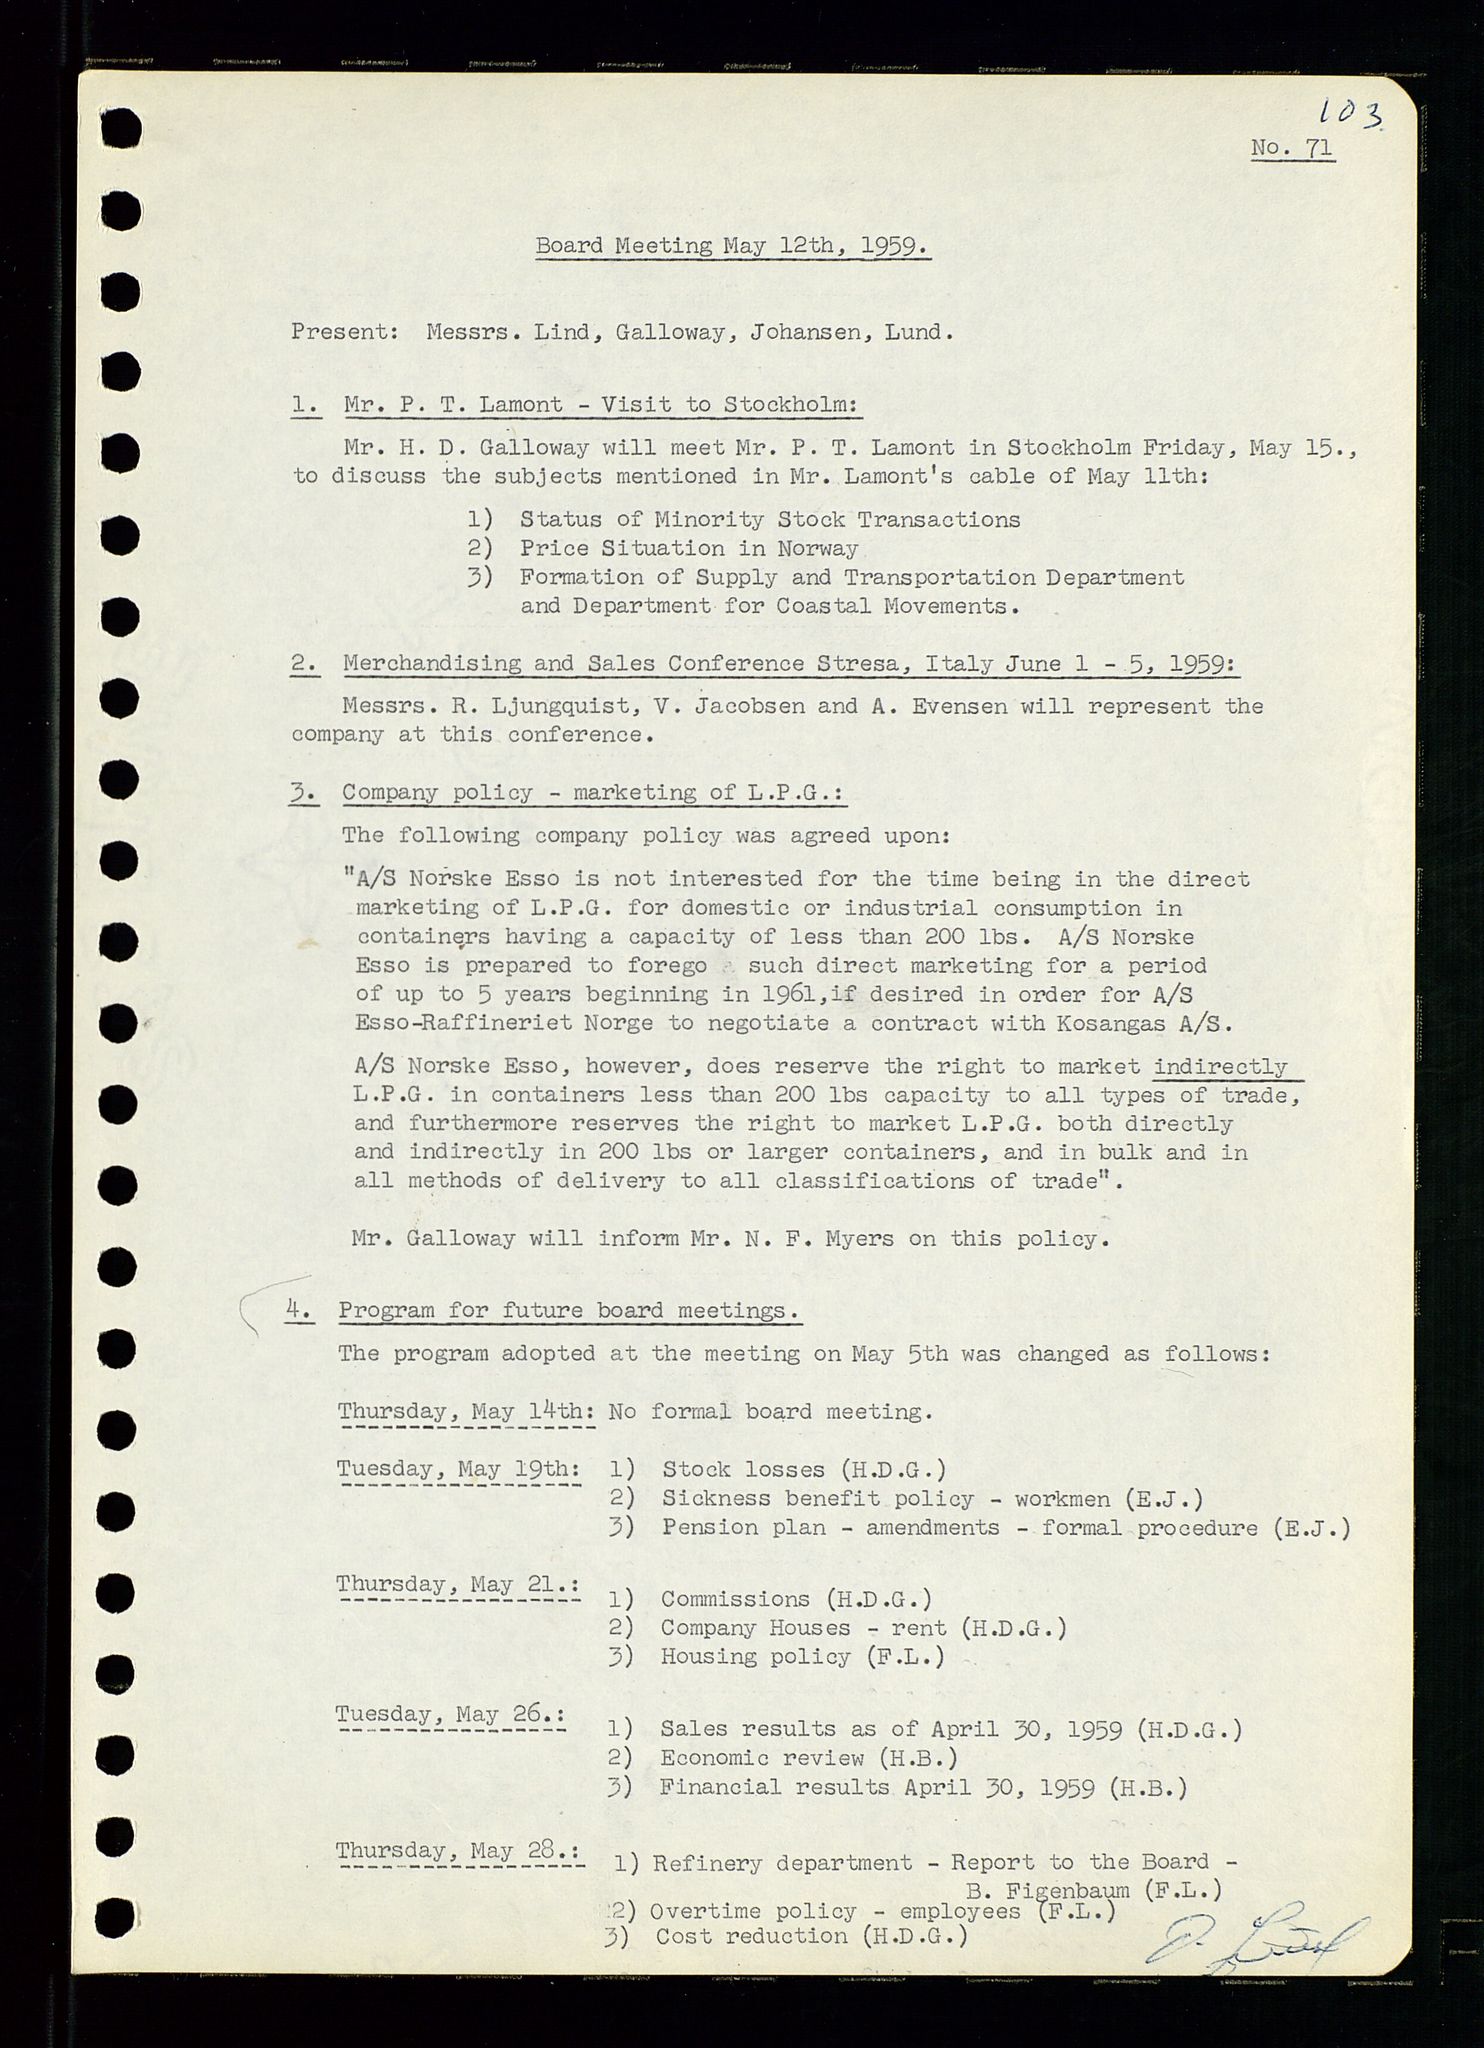 Pa 0982 - Esso Norge A/S, SAST/A-100448/A/Aa/L0001/0001: Den administrerende direksjon Board minutes (styrereferater) / Den administrerende direksjon Board minutes (styrereferater), 1958-1959, s. 103